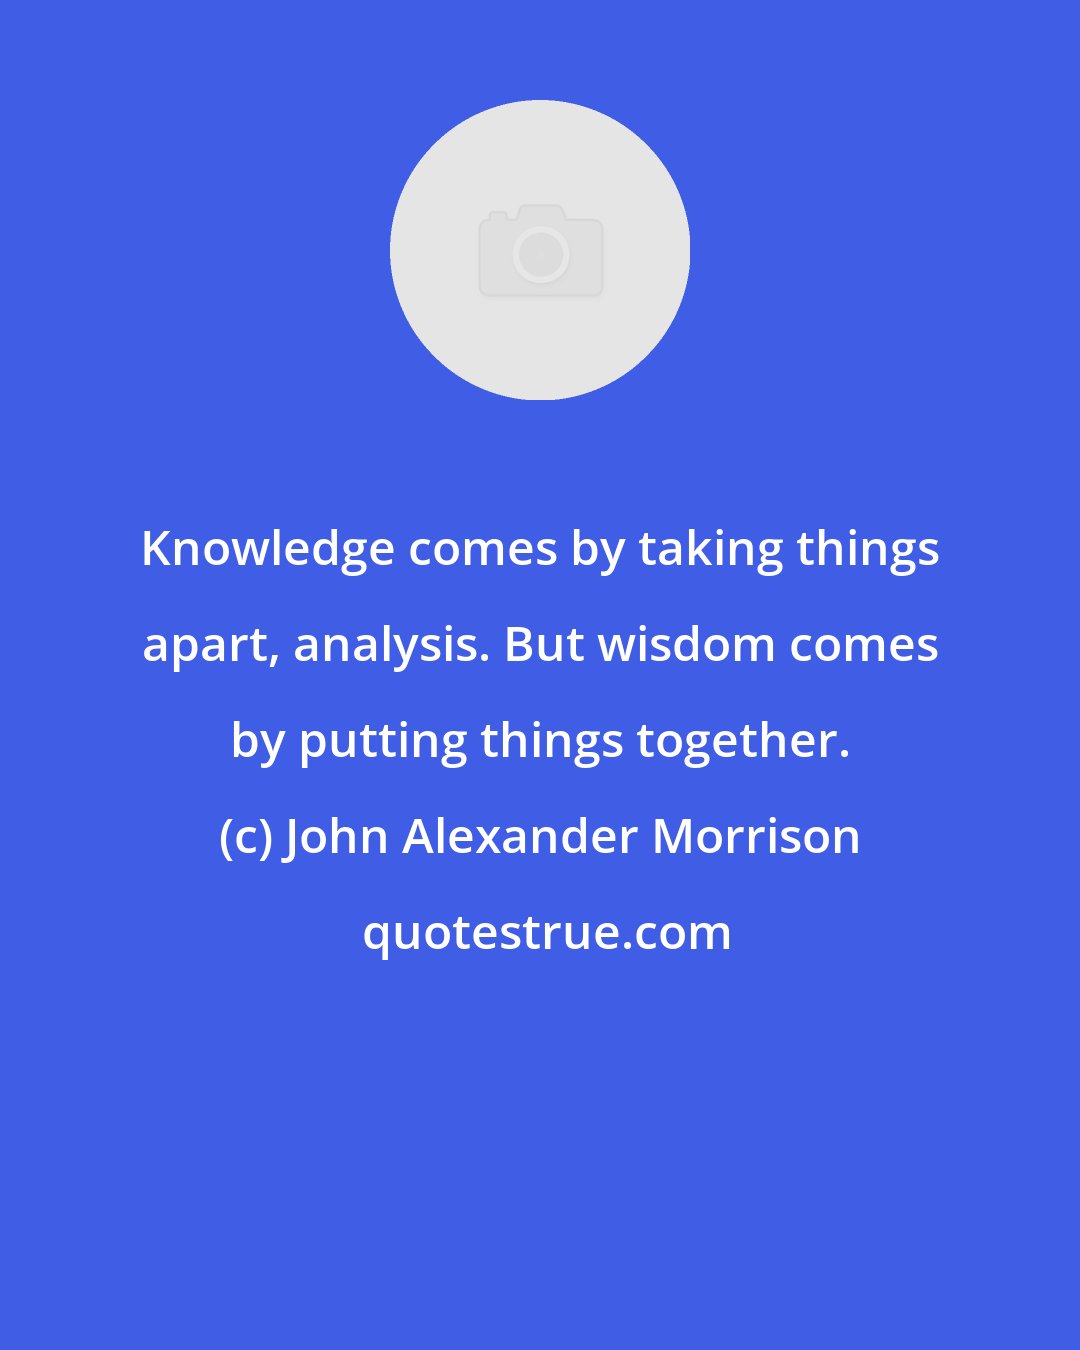 John Alexander Morrison: Knowledge comes by taking things apart, analysis. But wisdom comes by putting things together.